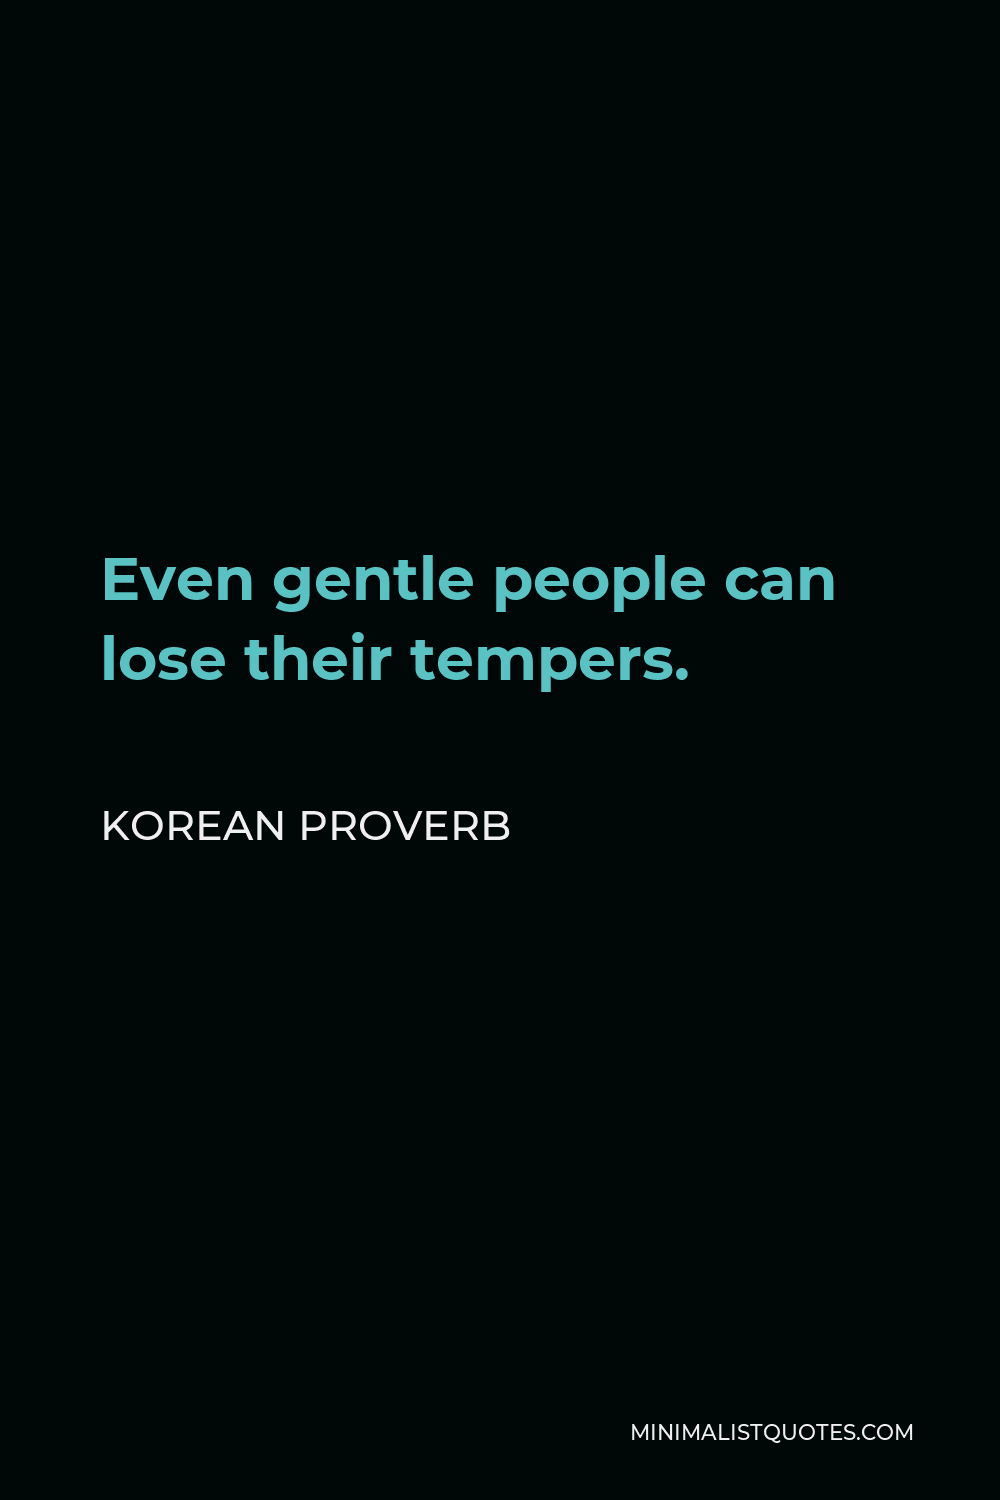 Korean Proverb Quote - Even gentle people can lose their tempers.